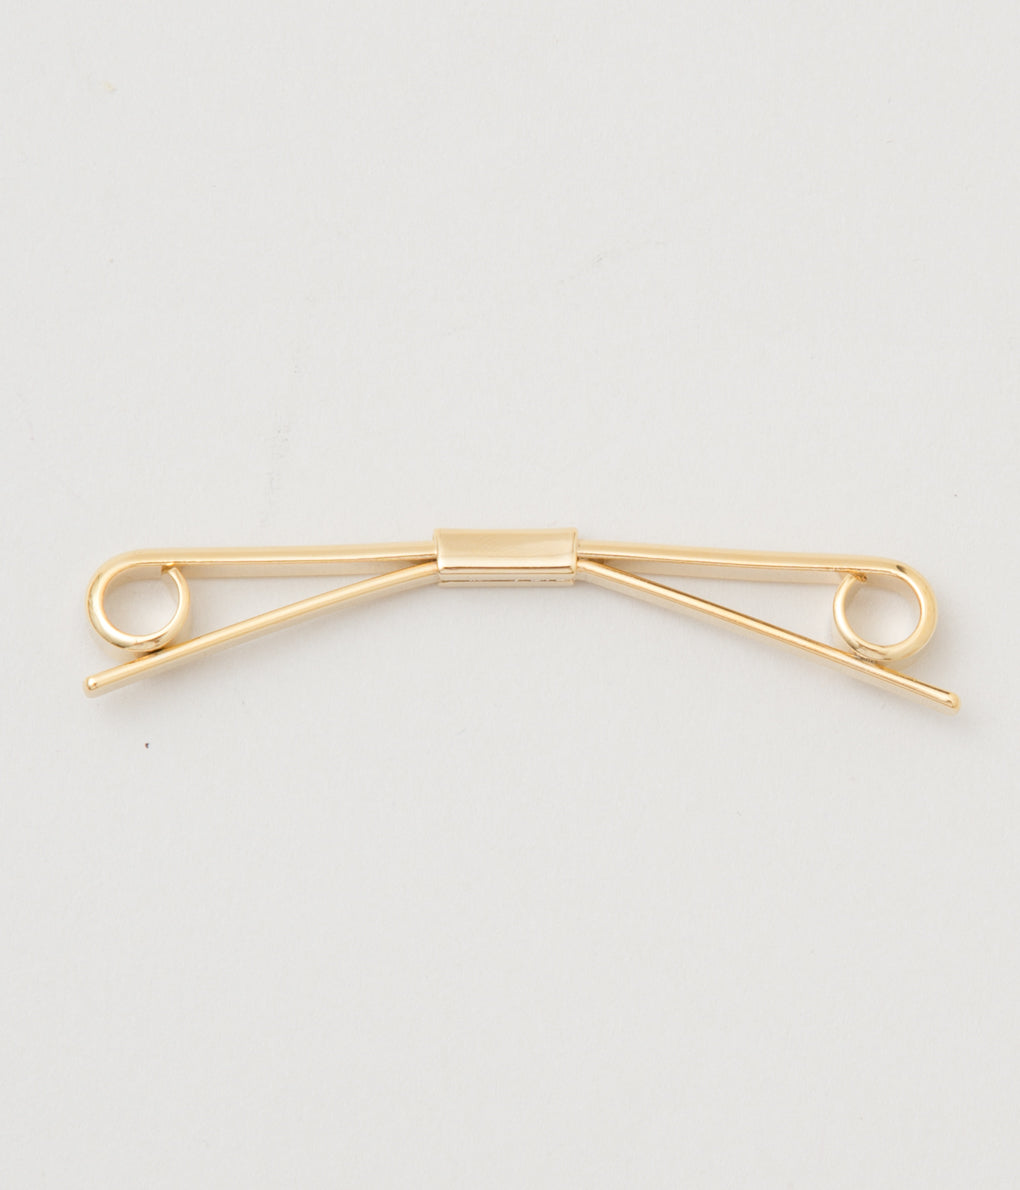 FINE AND DANDY "COLLAR BARS CURLED" (GOLD)